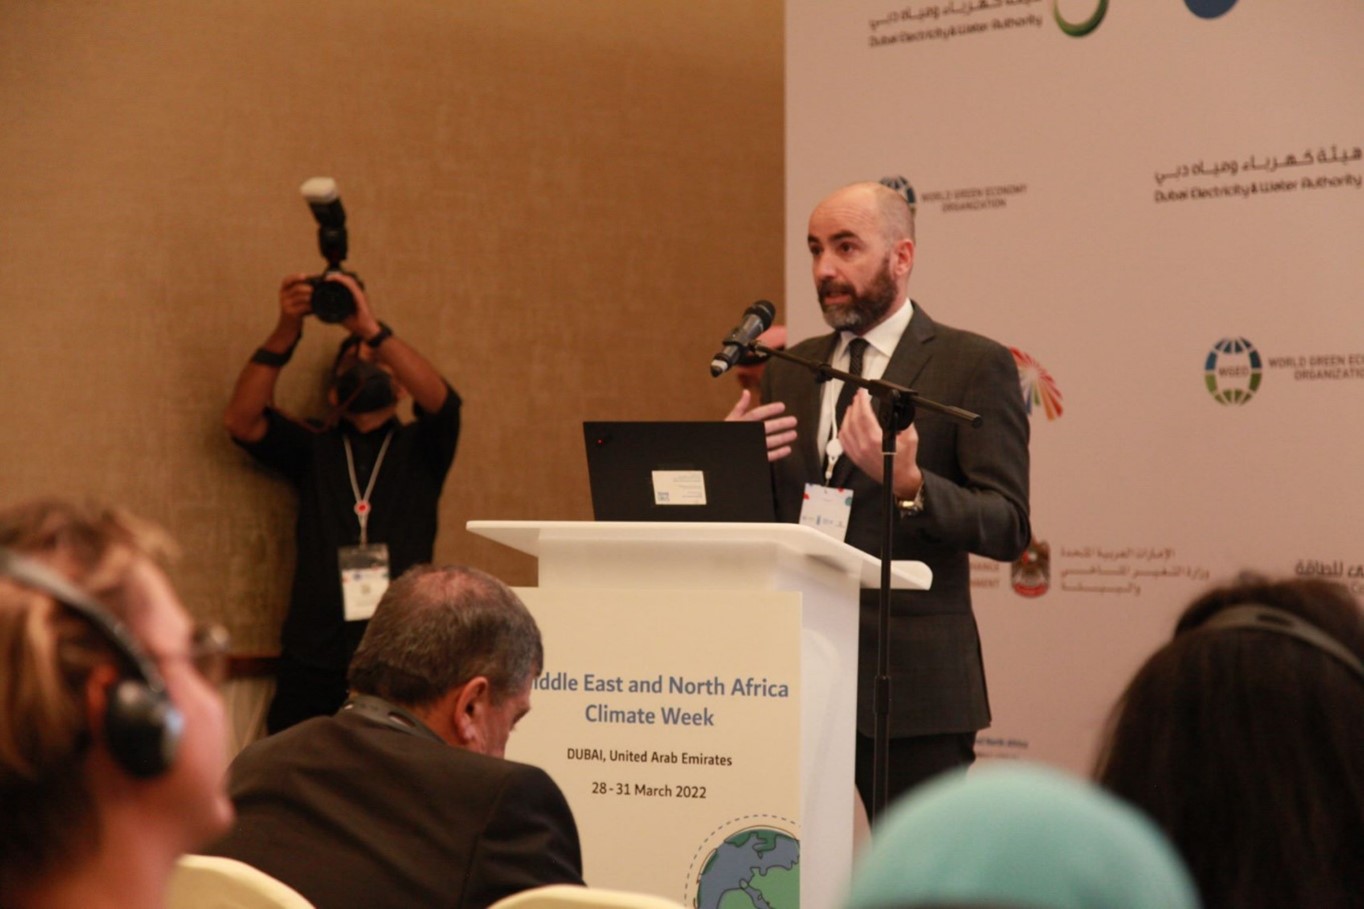 Alejandro Jiménez, SIWI, head of Water and Sanitation Department, presentating at the Middle East and North Africa Regional Climate Week in March 2022